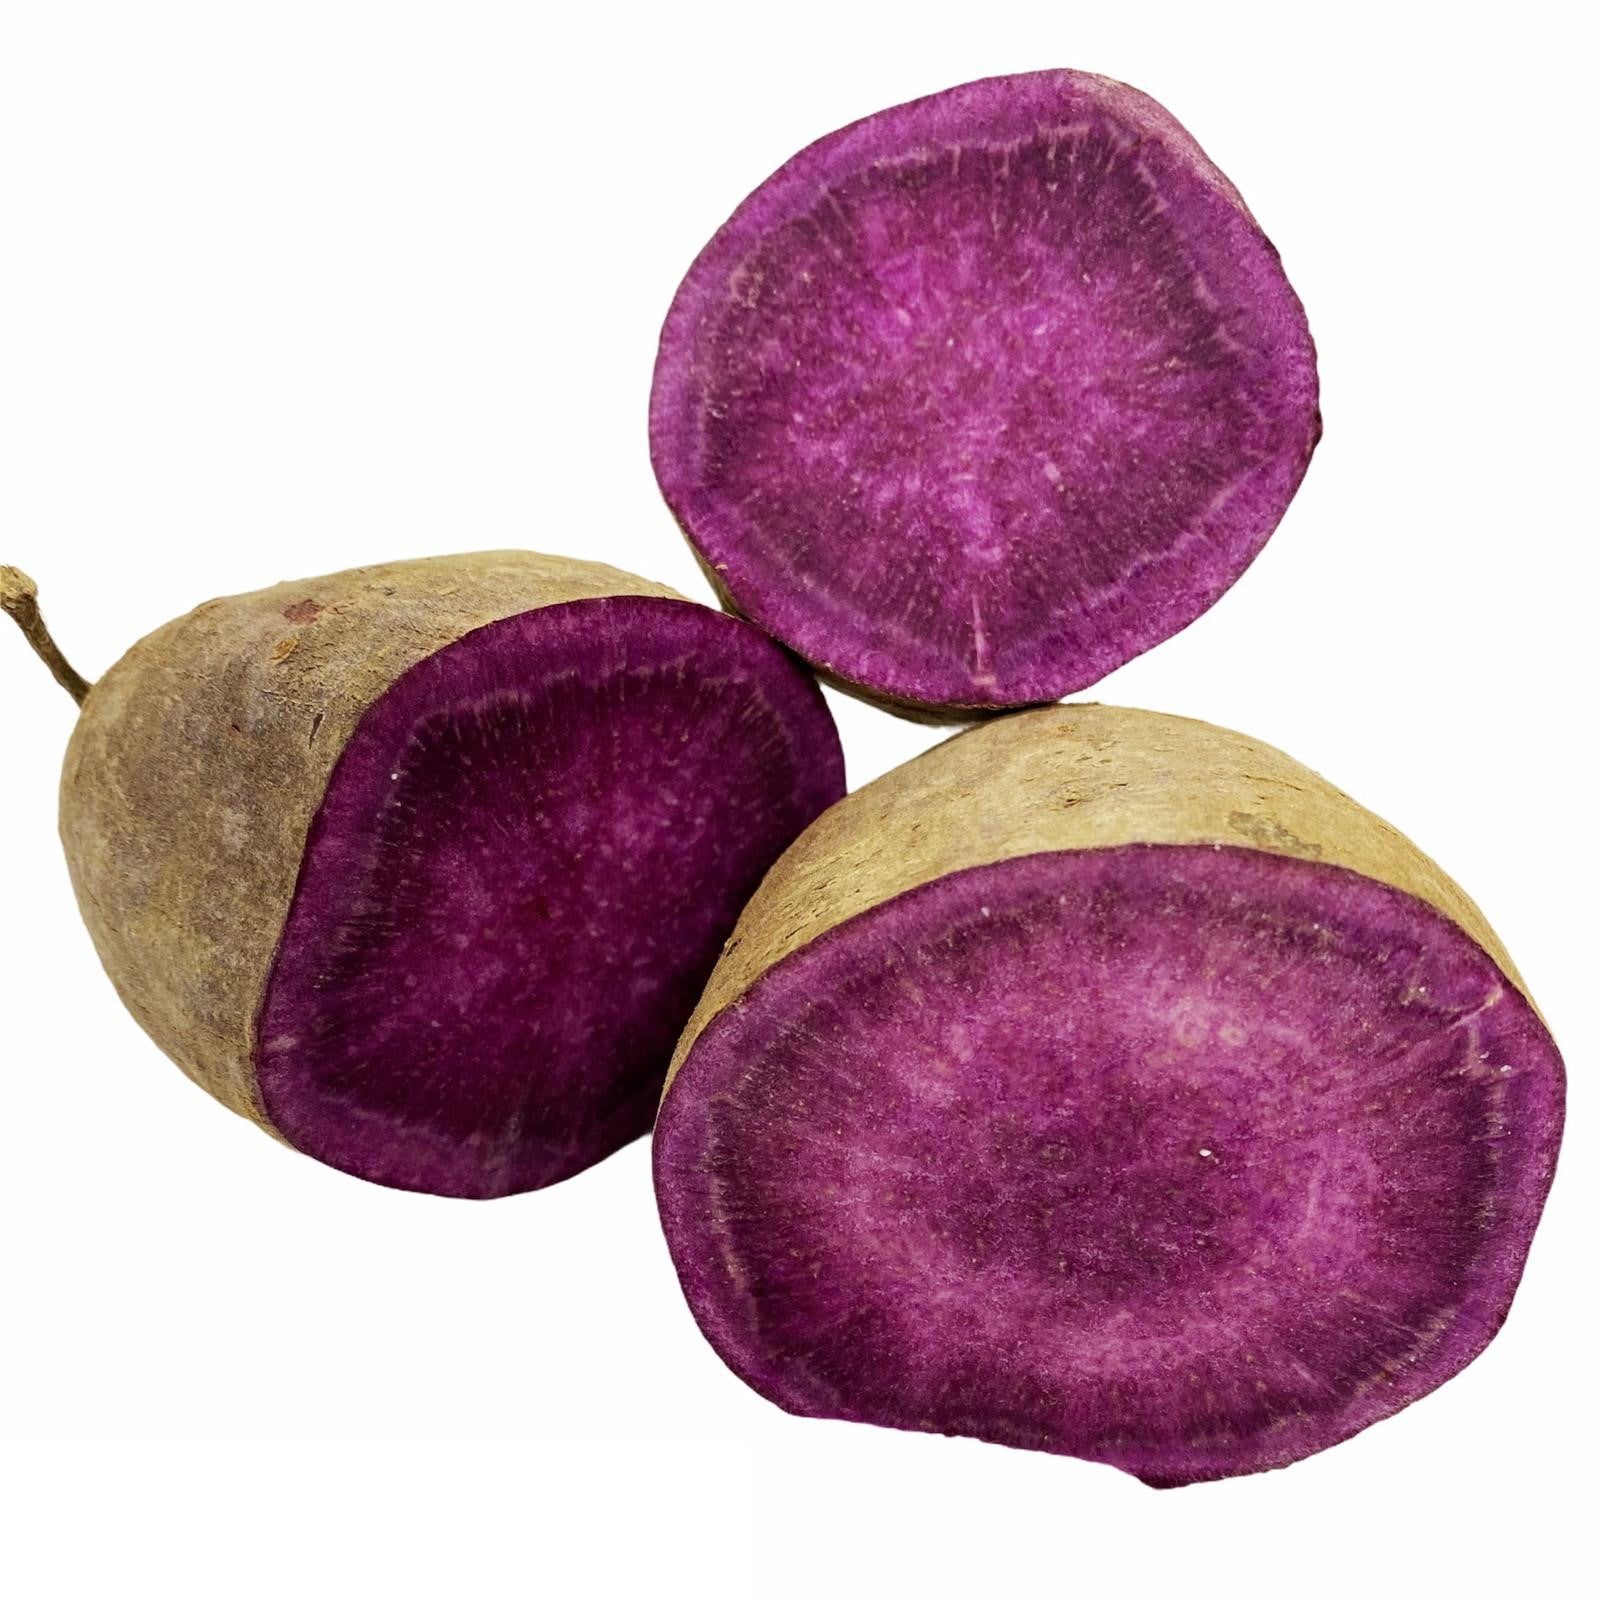 What Is a Purple Sweet Potato and How Do You Cook With It?